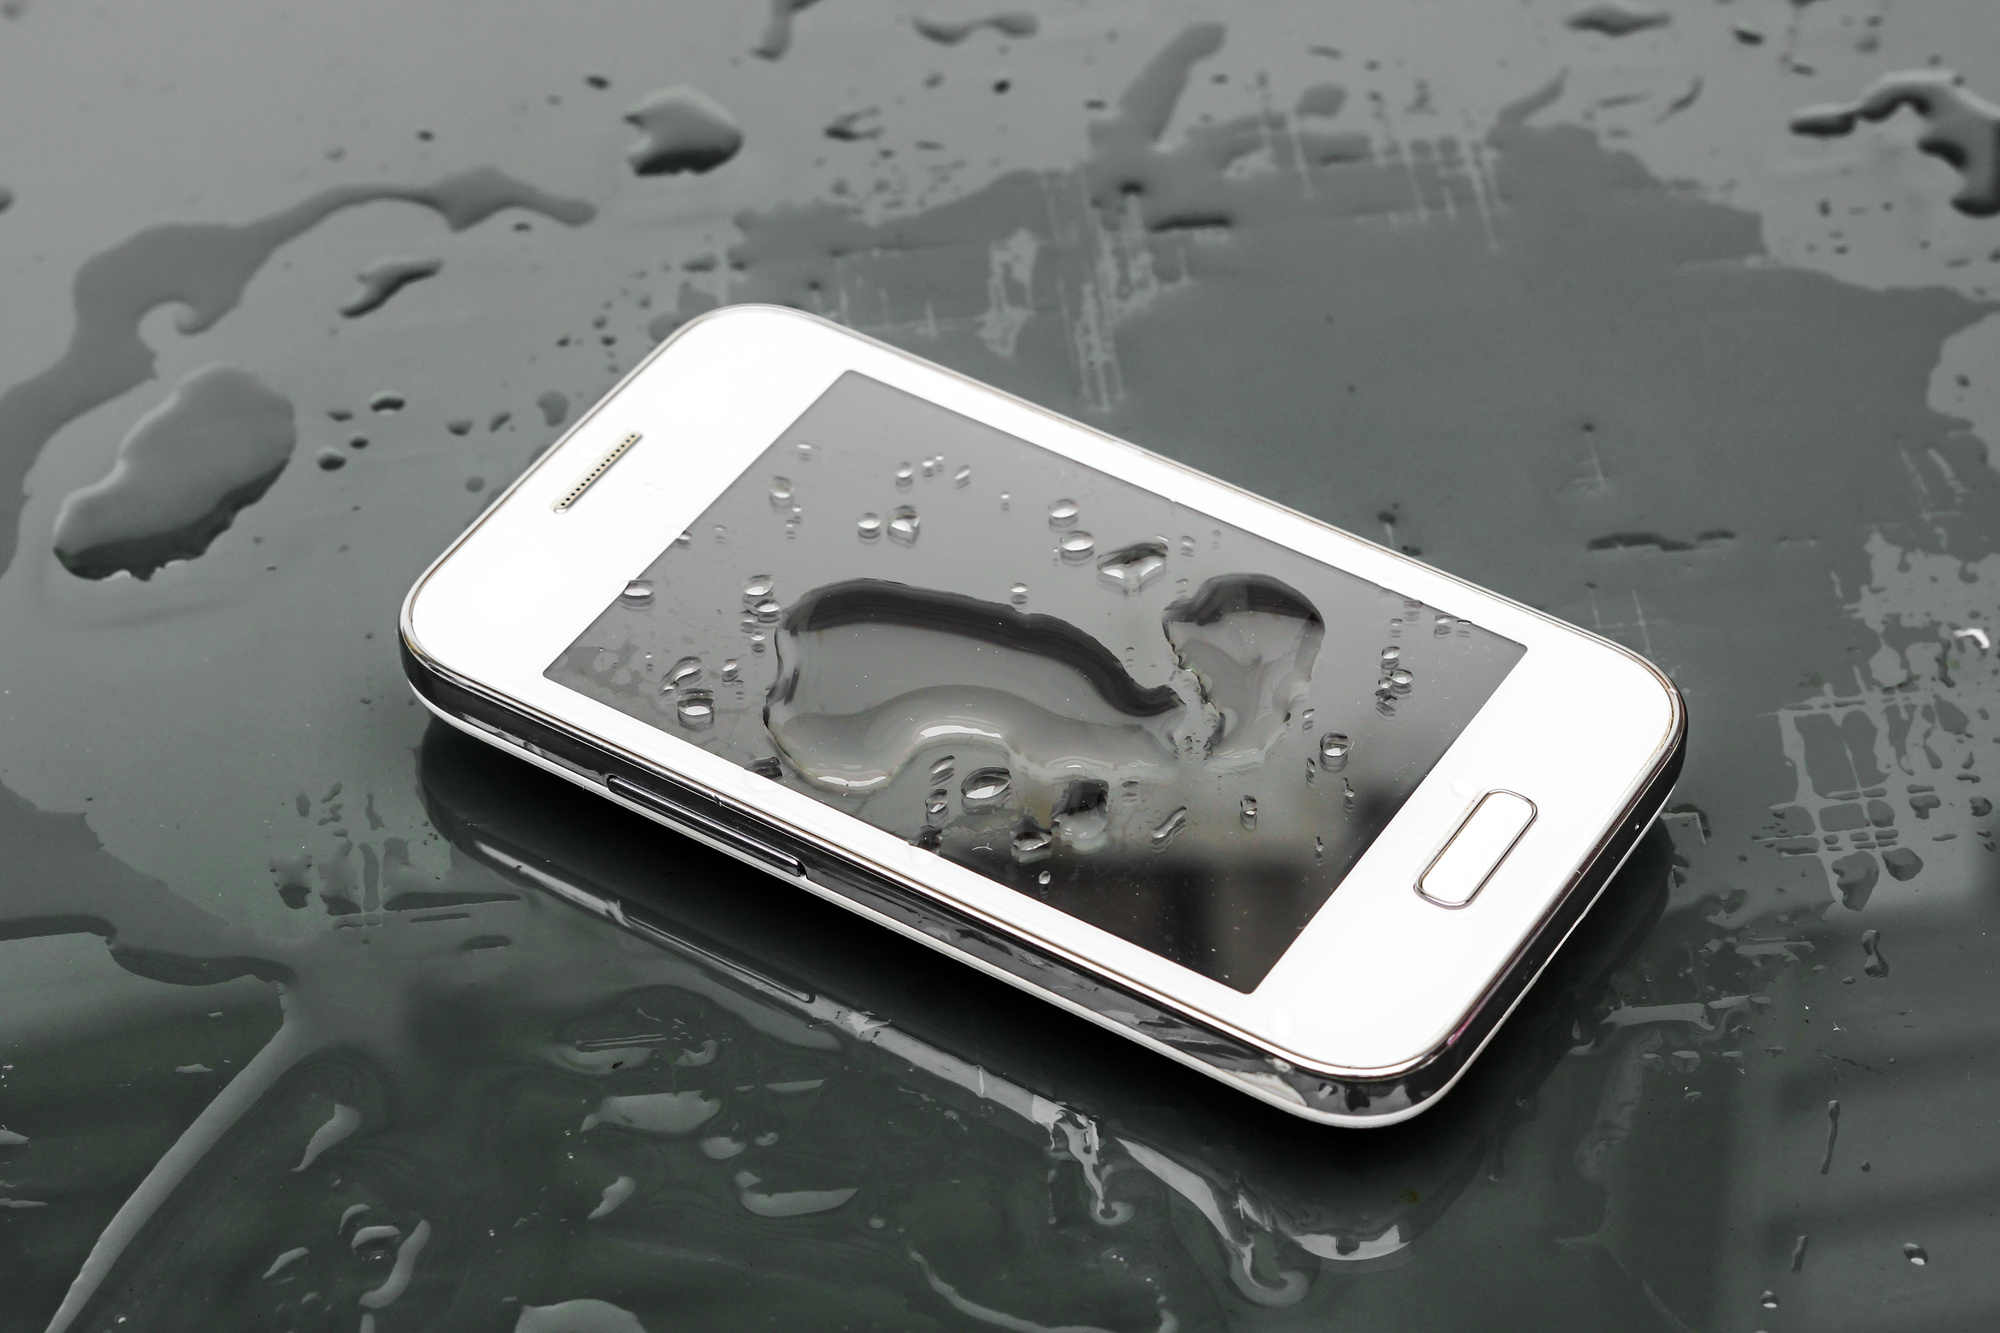 First Aid for a Wet Phone with Charging Issues